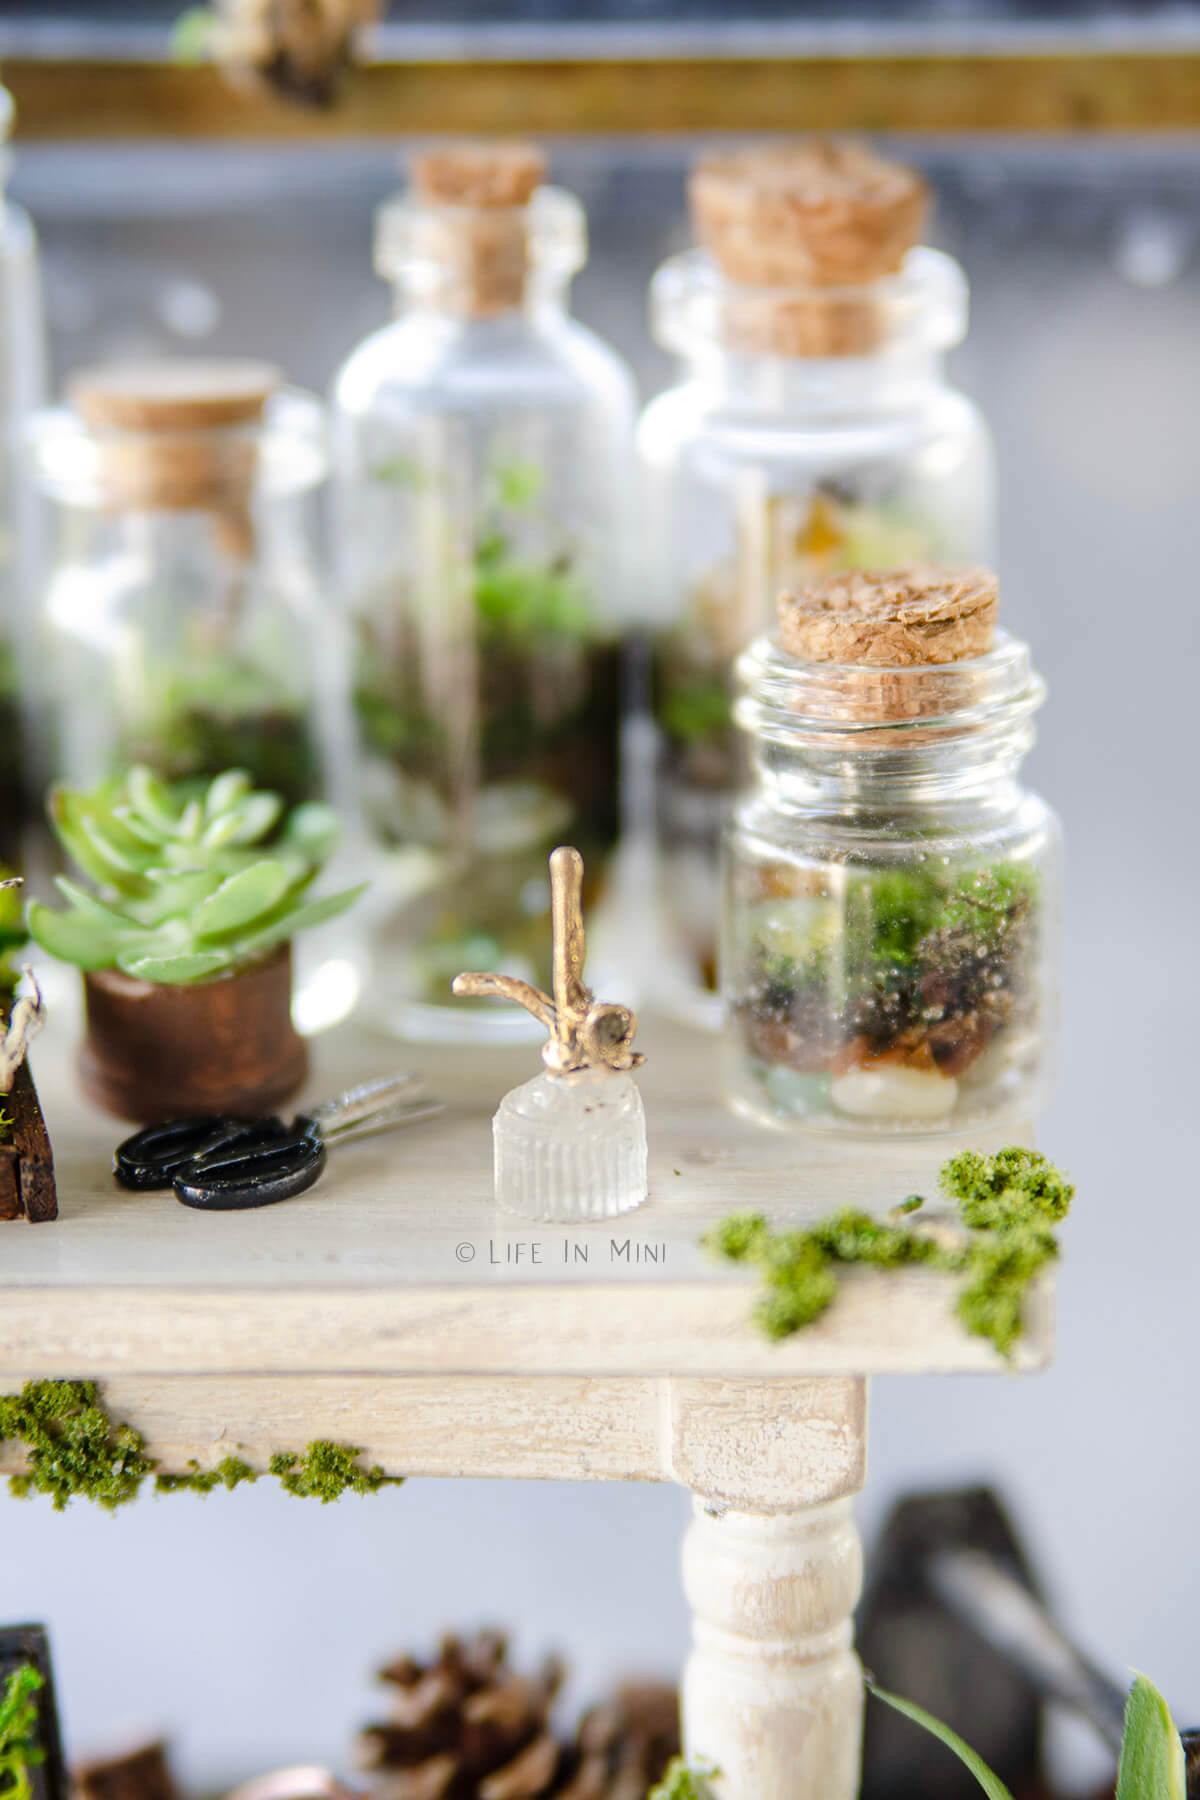 Closeup of a miniature plant mister made of resin with mini terrariums around it